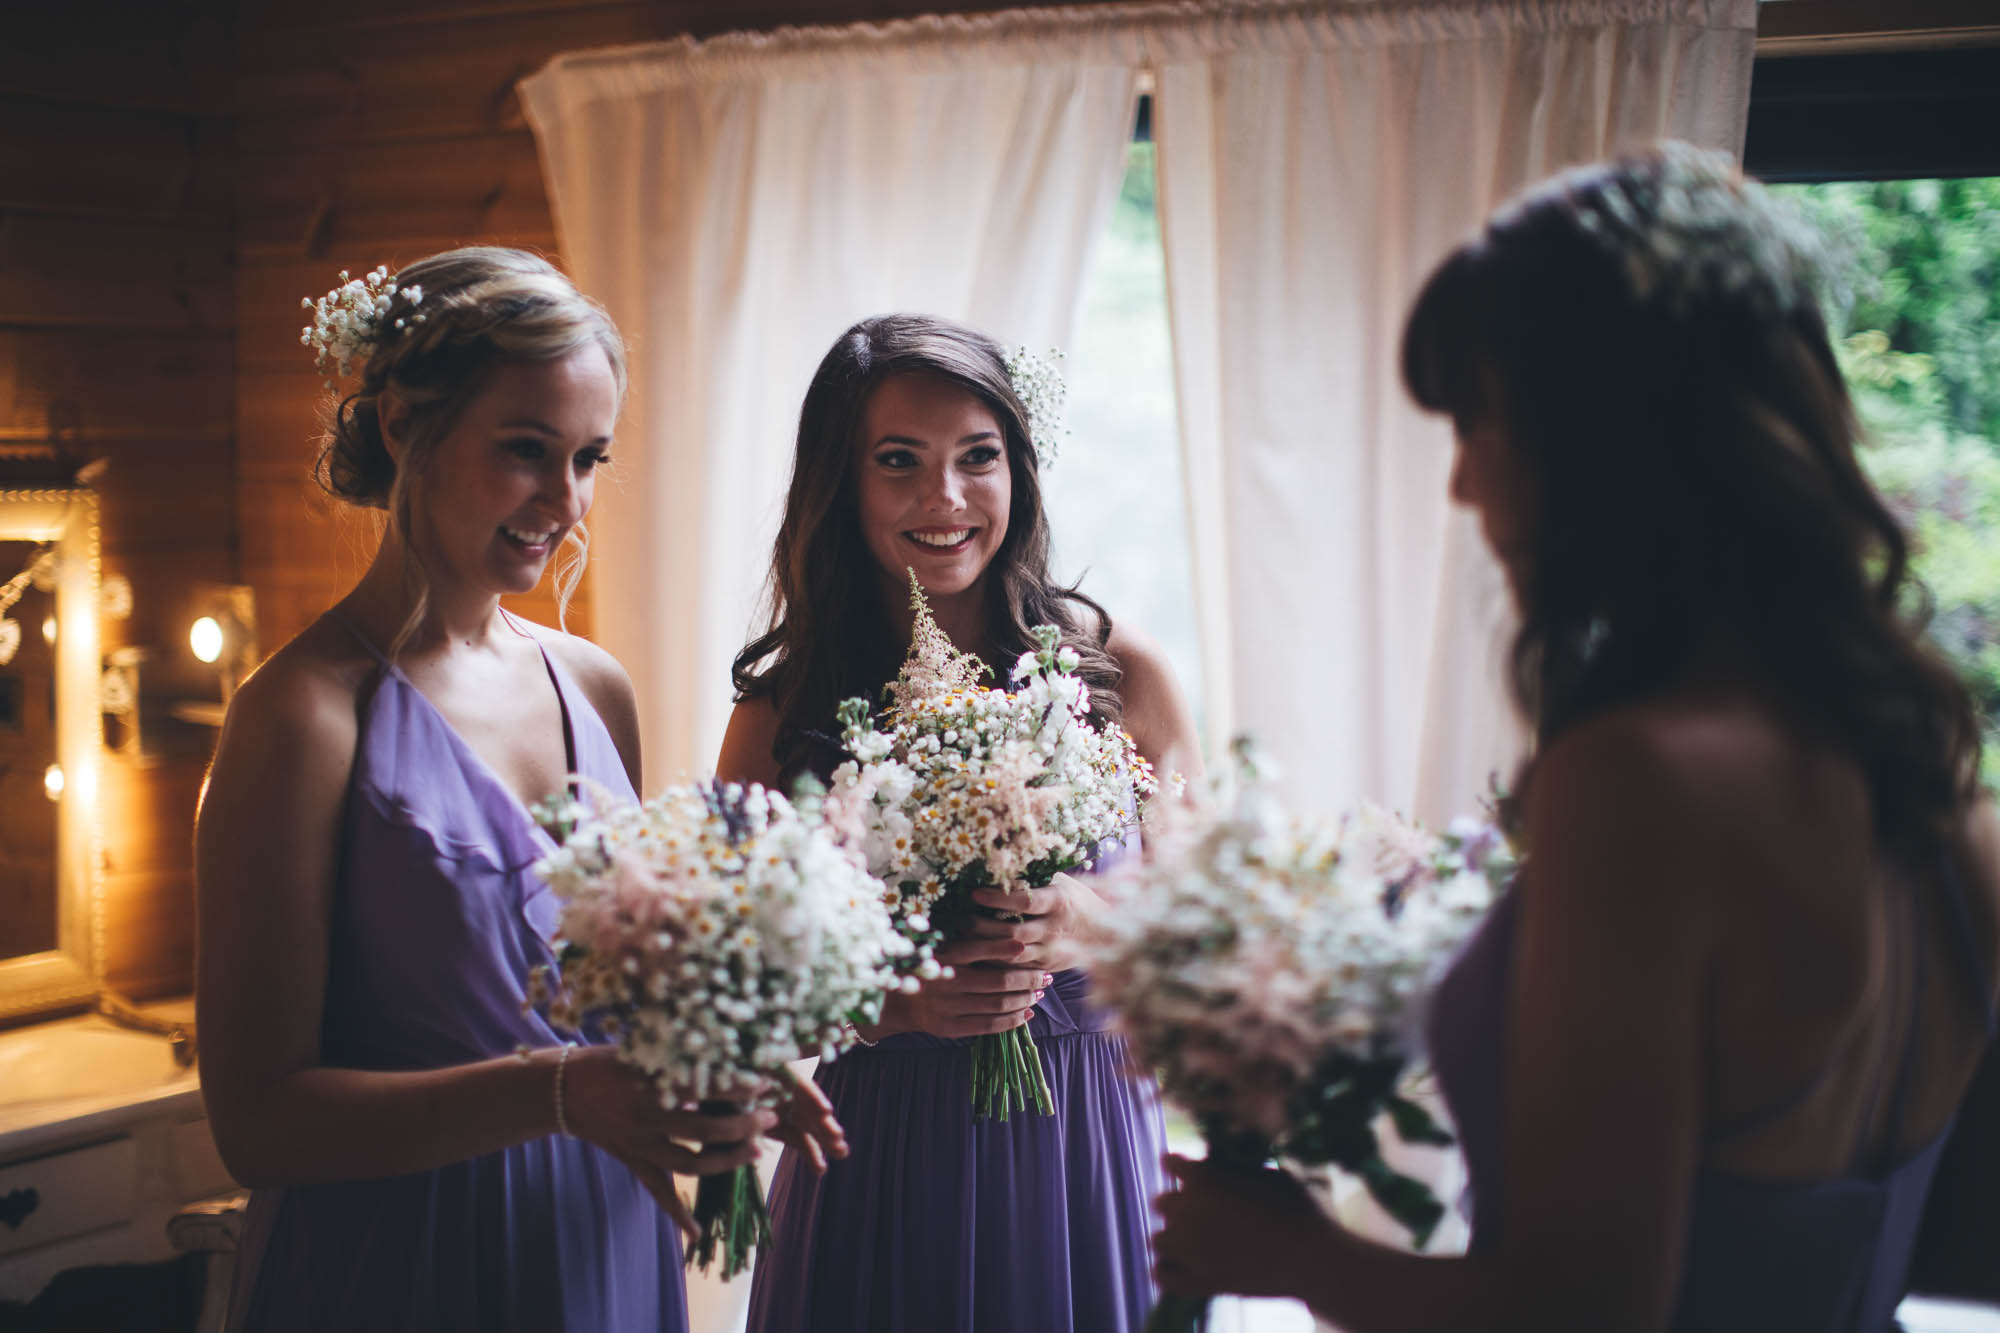 BRIDEMAIDS WITH FLOWERS